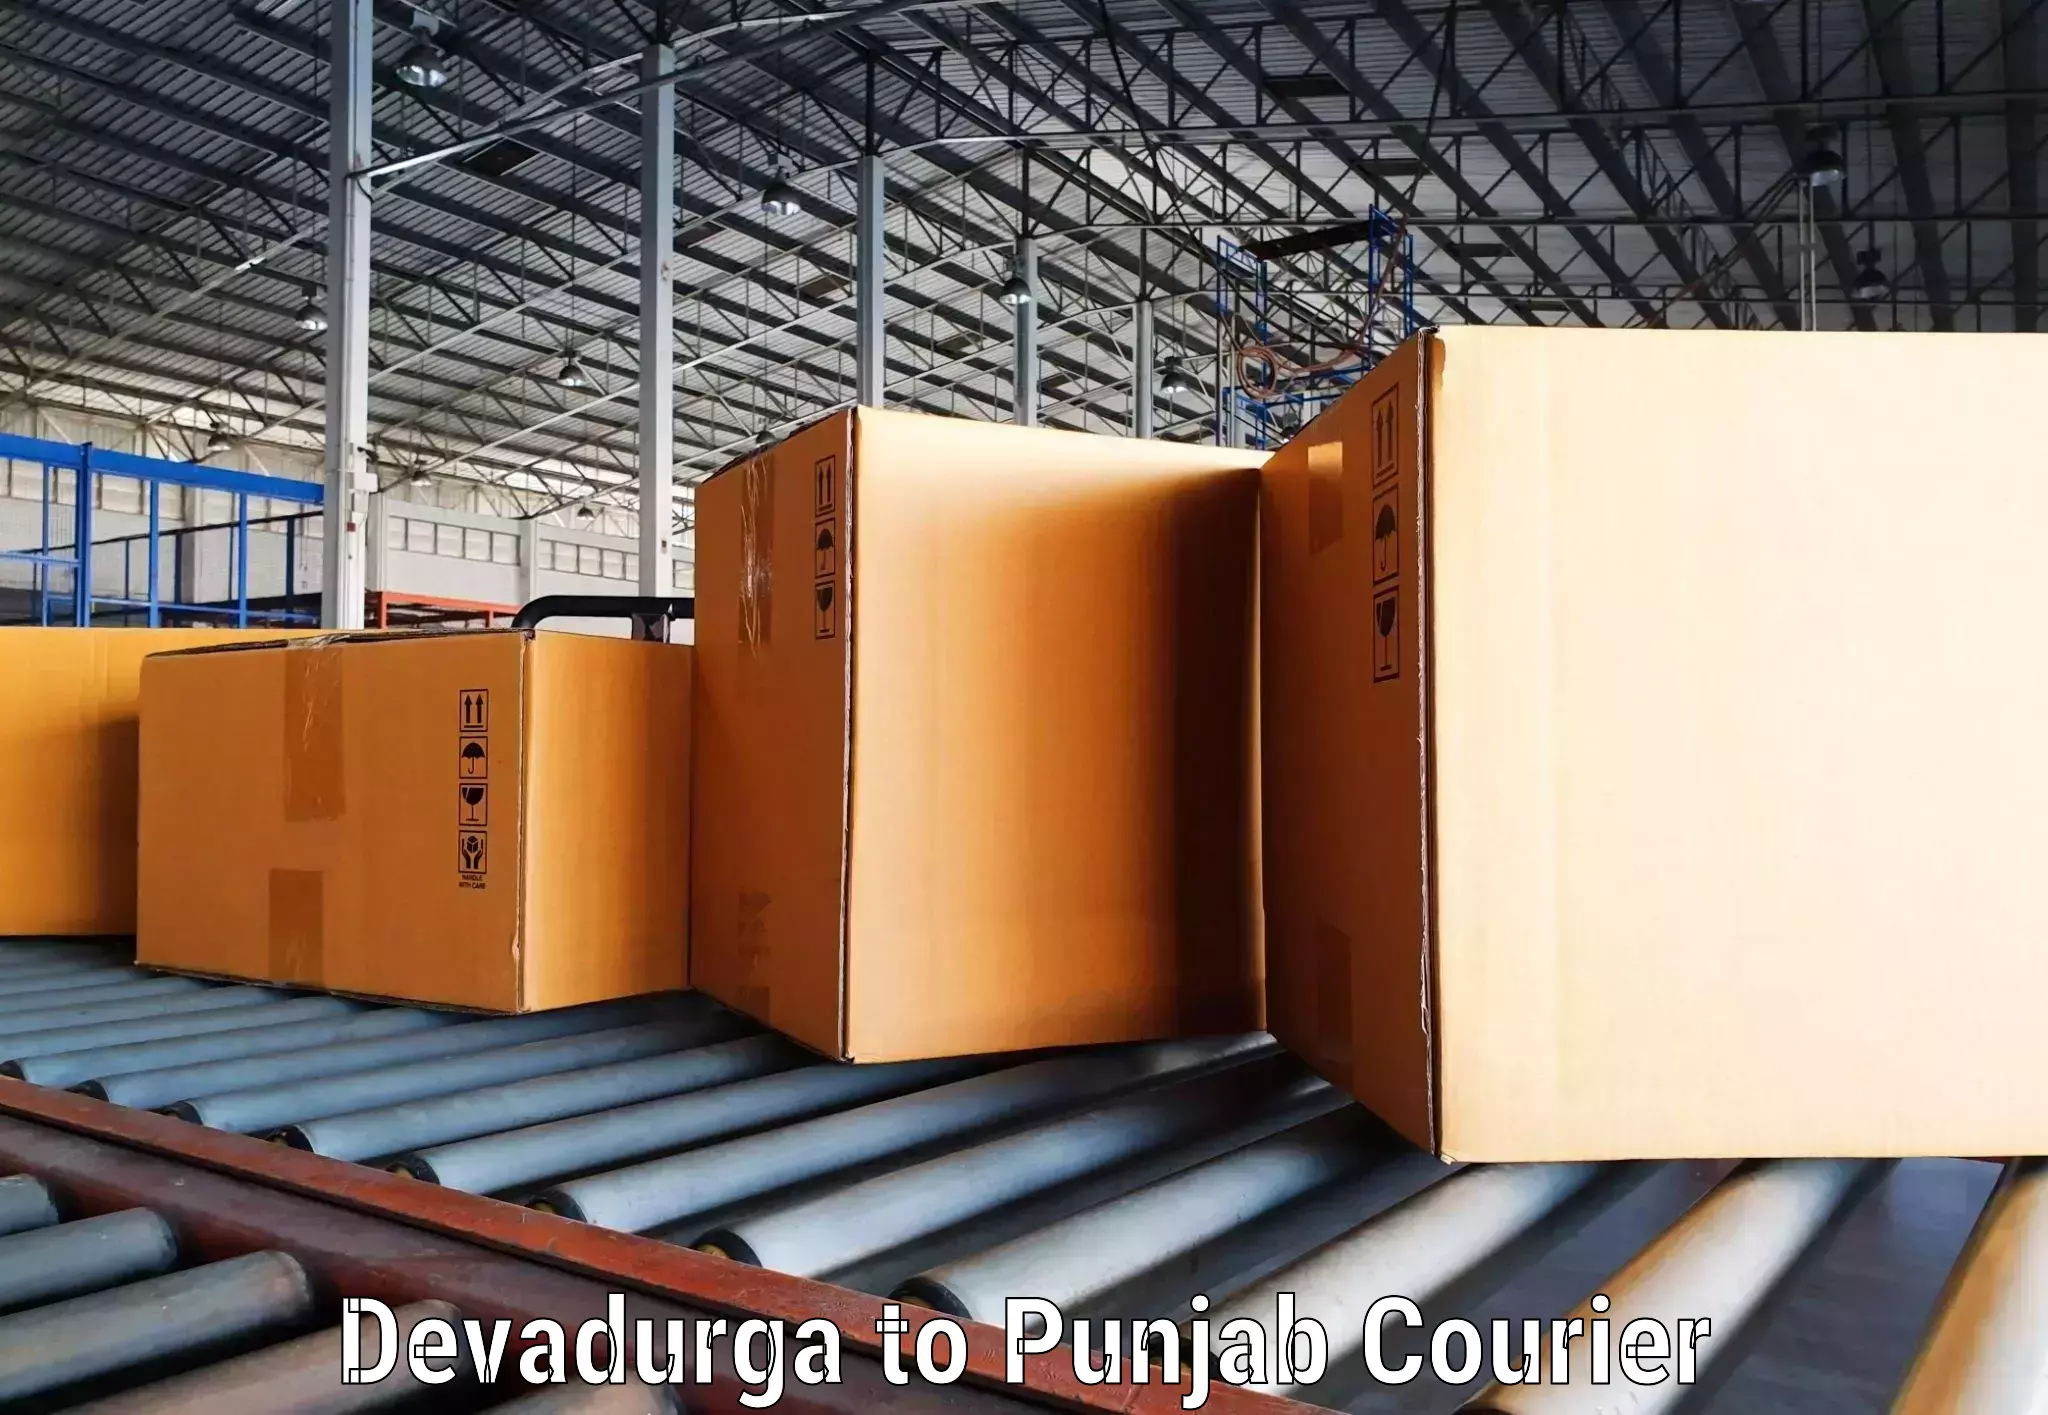 State-of-the-art courier technology Devadurga to Punjab